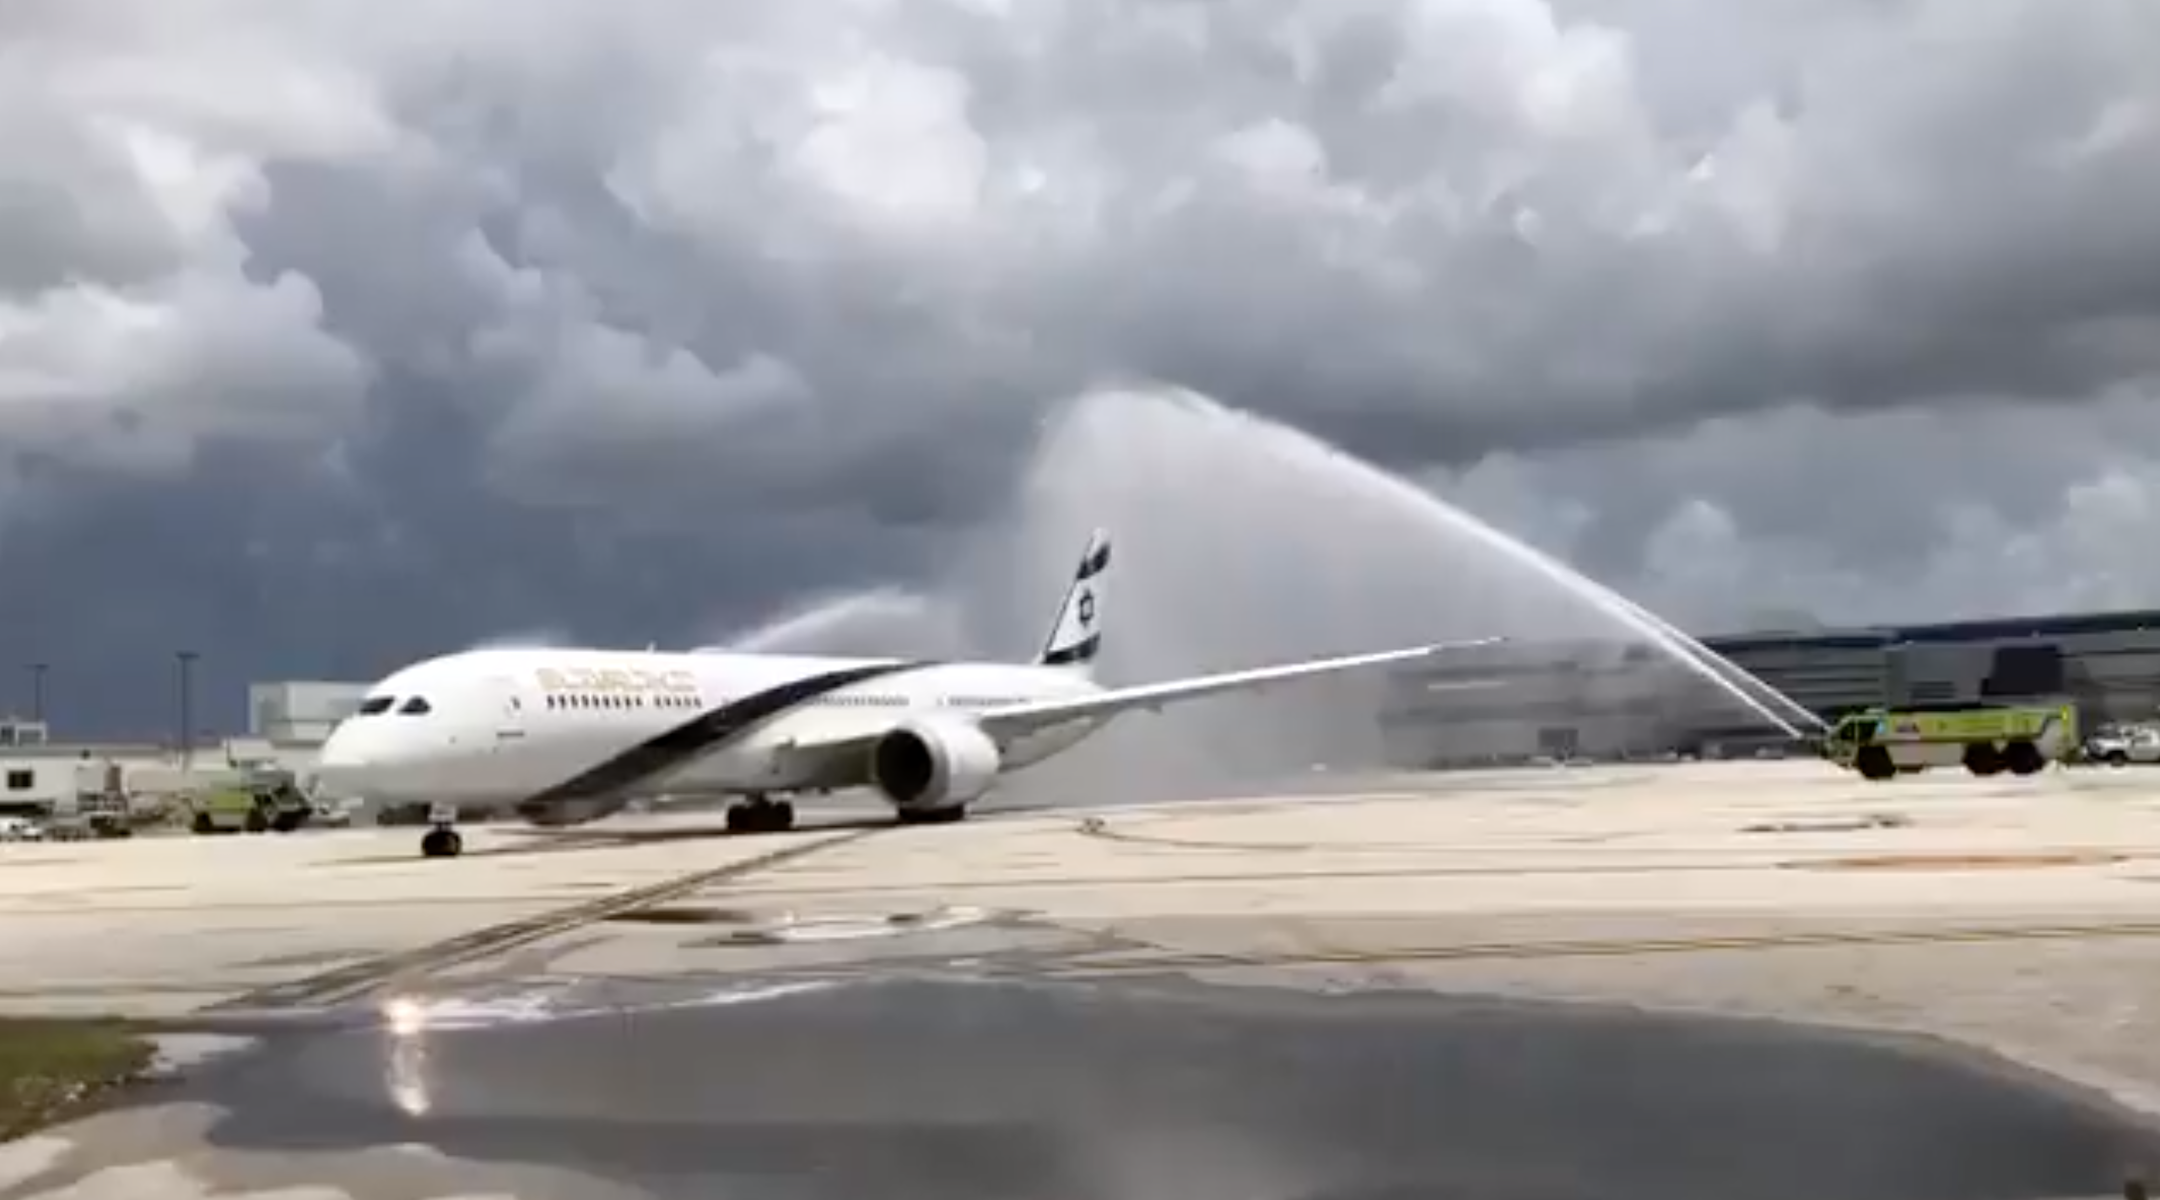 An El Al airplane carrying members of an Israel Defense Forces rescue team is given a "water salute" upon departing Miami on July 11, 2021. (Screenshot from Twitter)